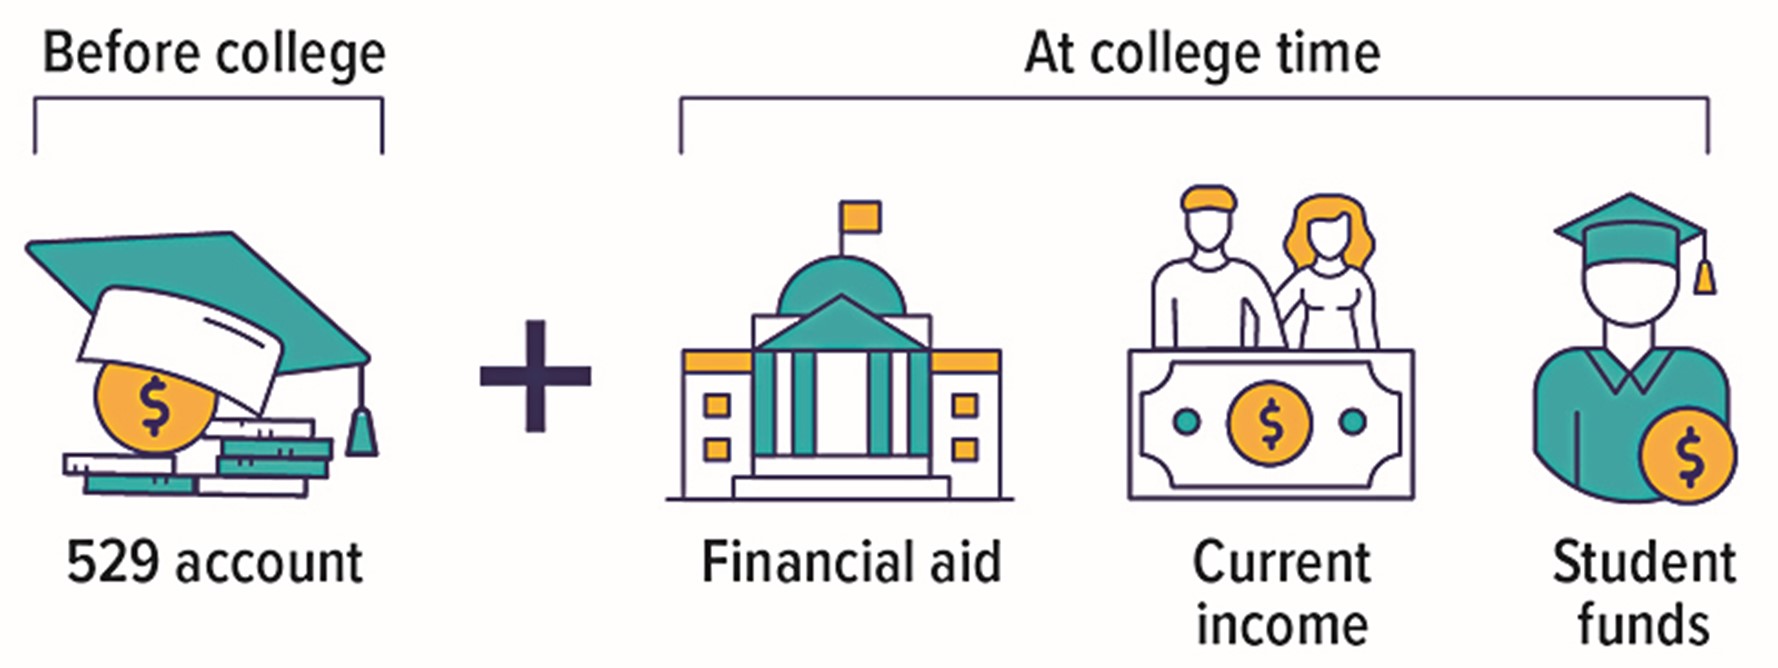 How a 529 Account Helps at College Time